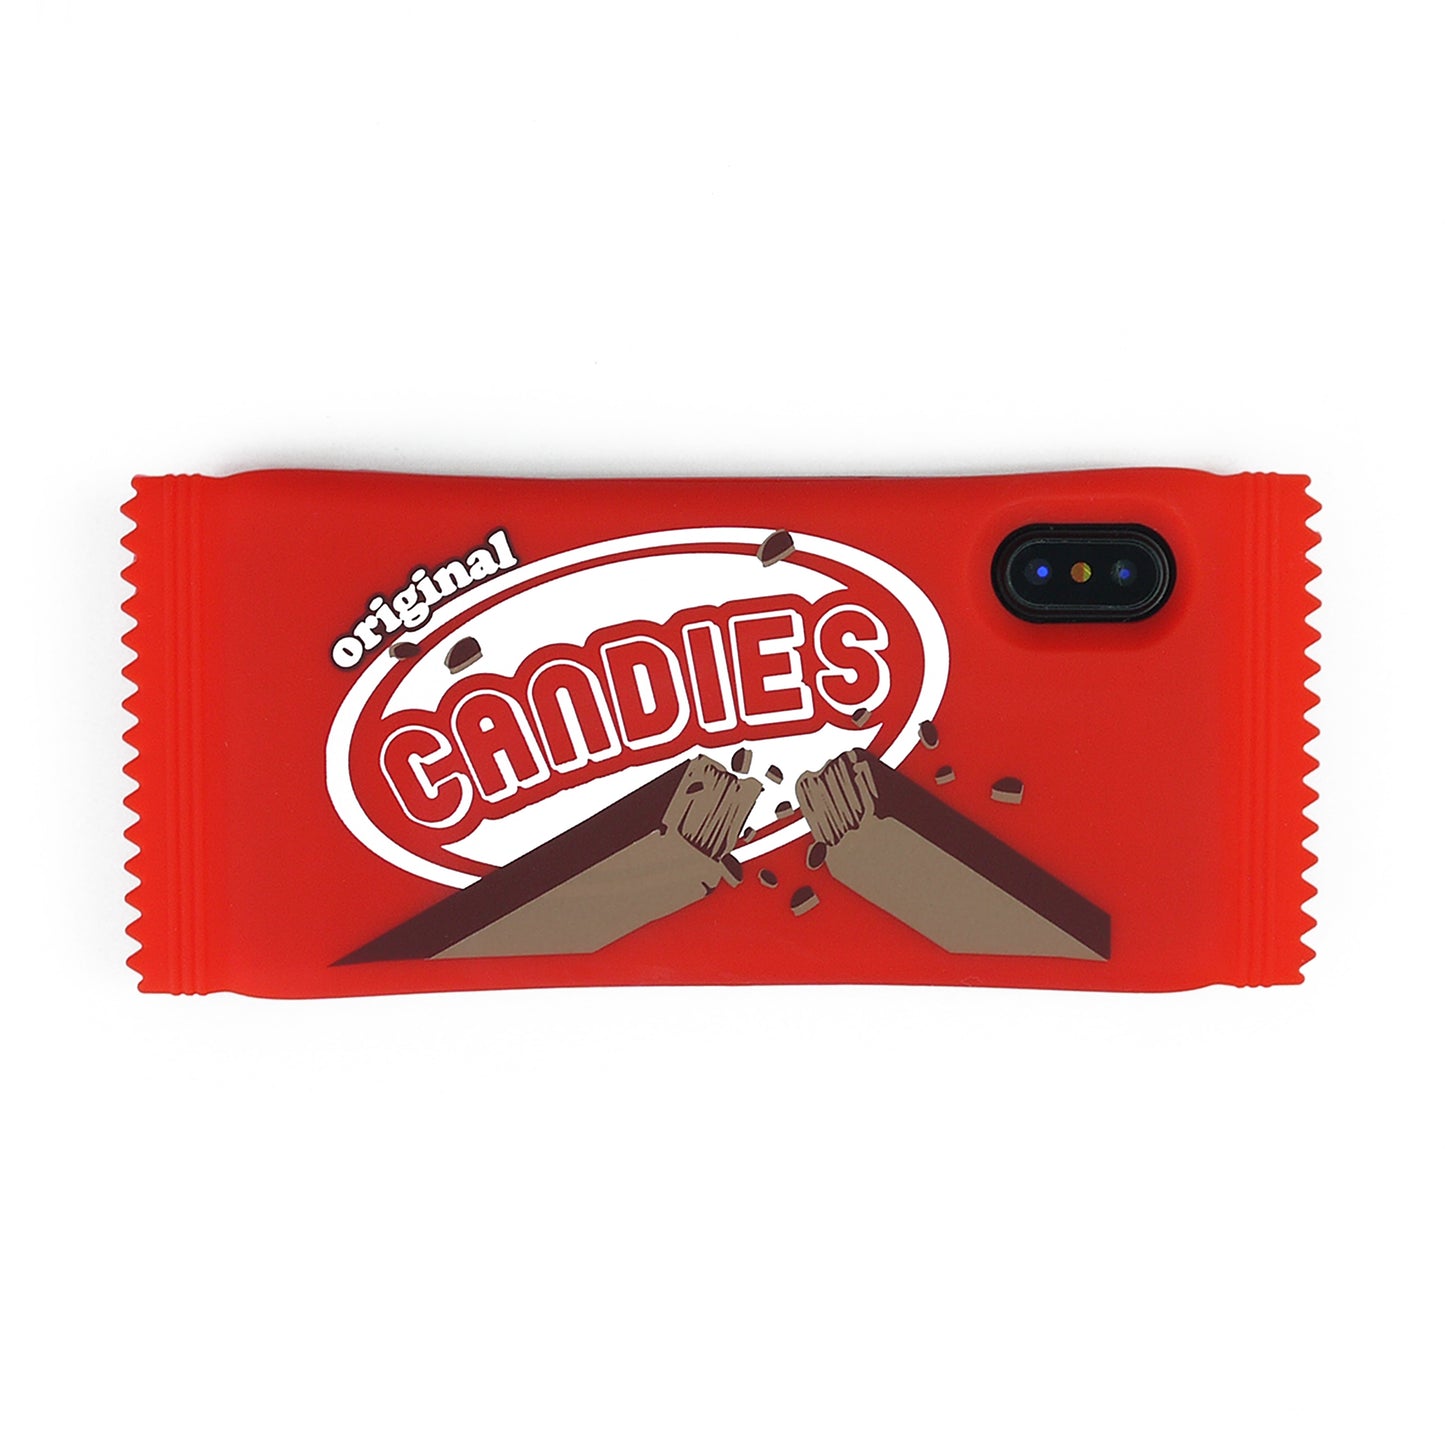 iPhone X/Xs Case - Snackpack - Chocolate